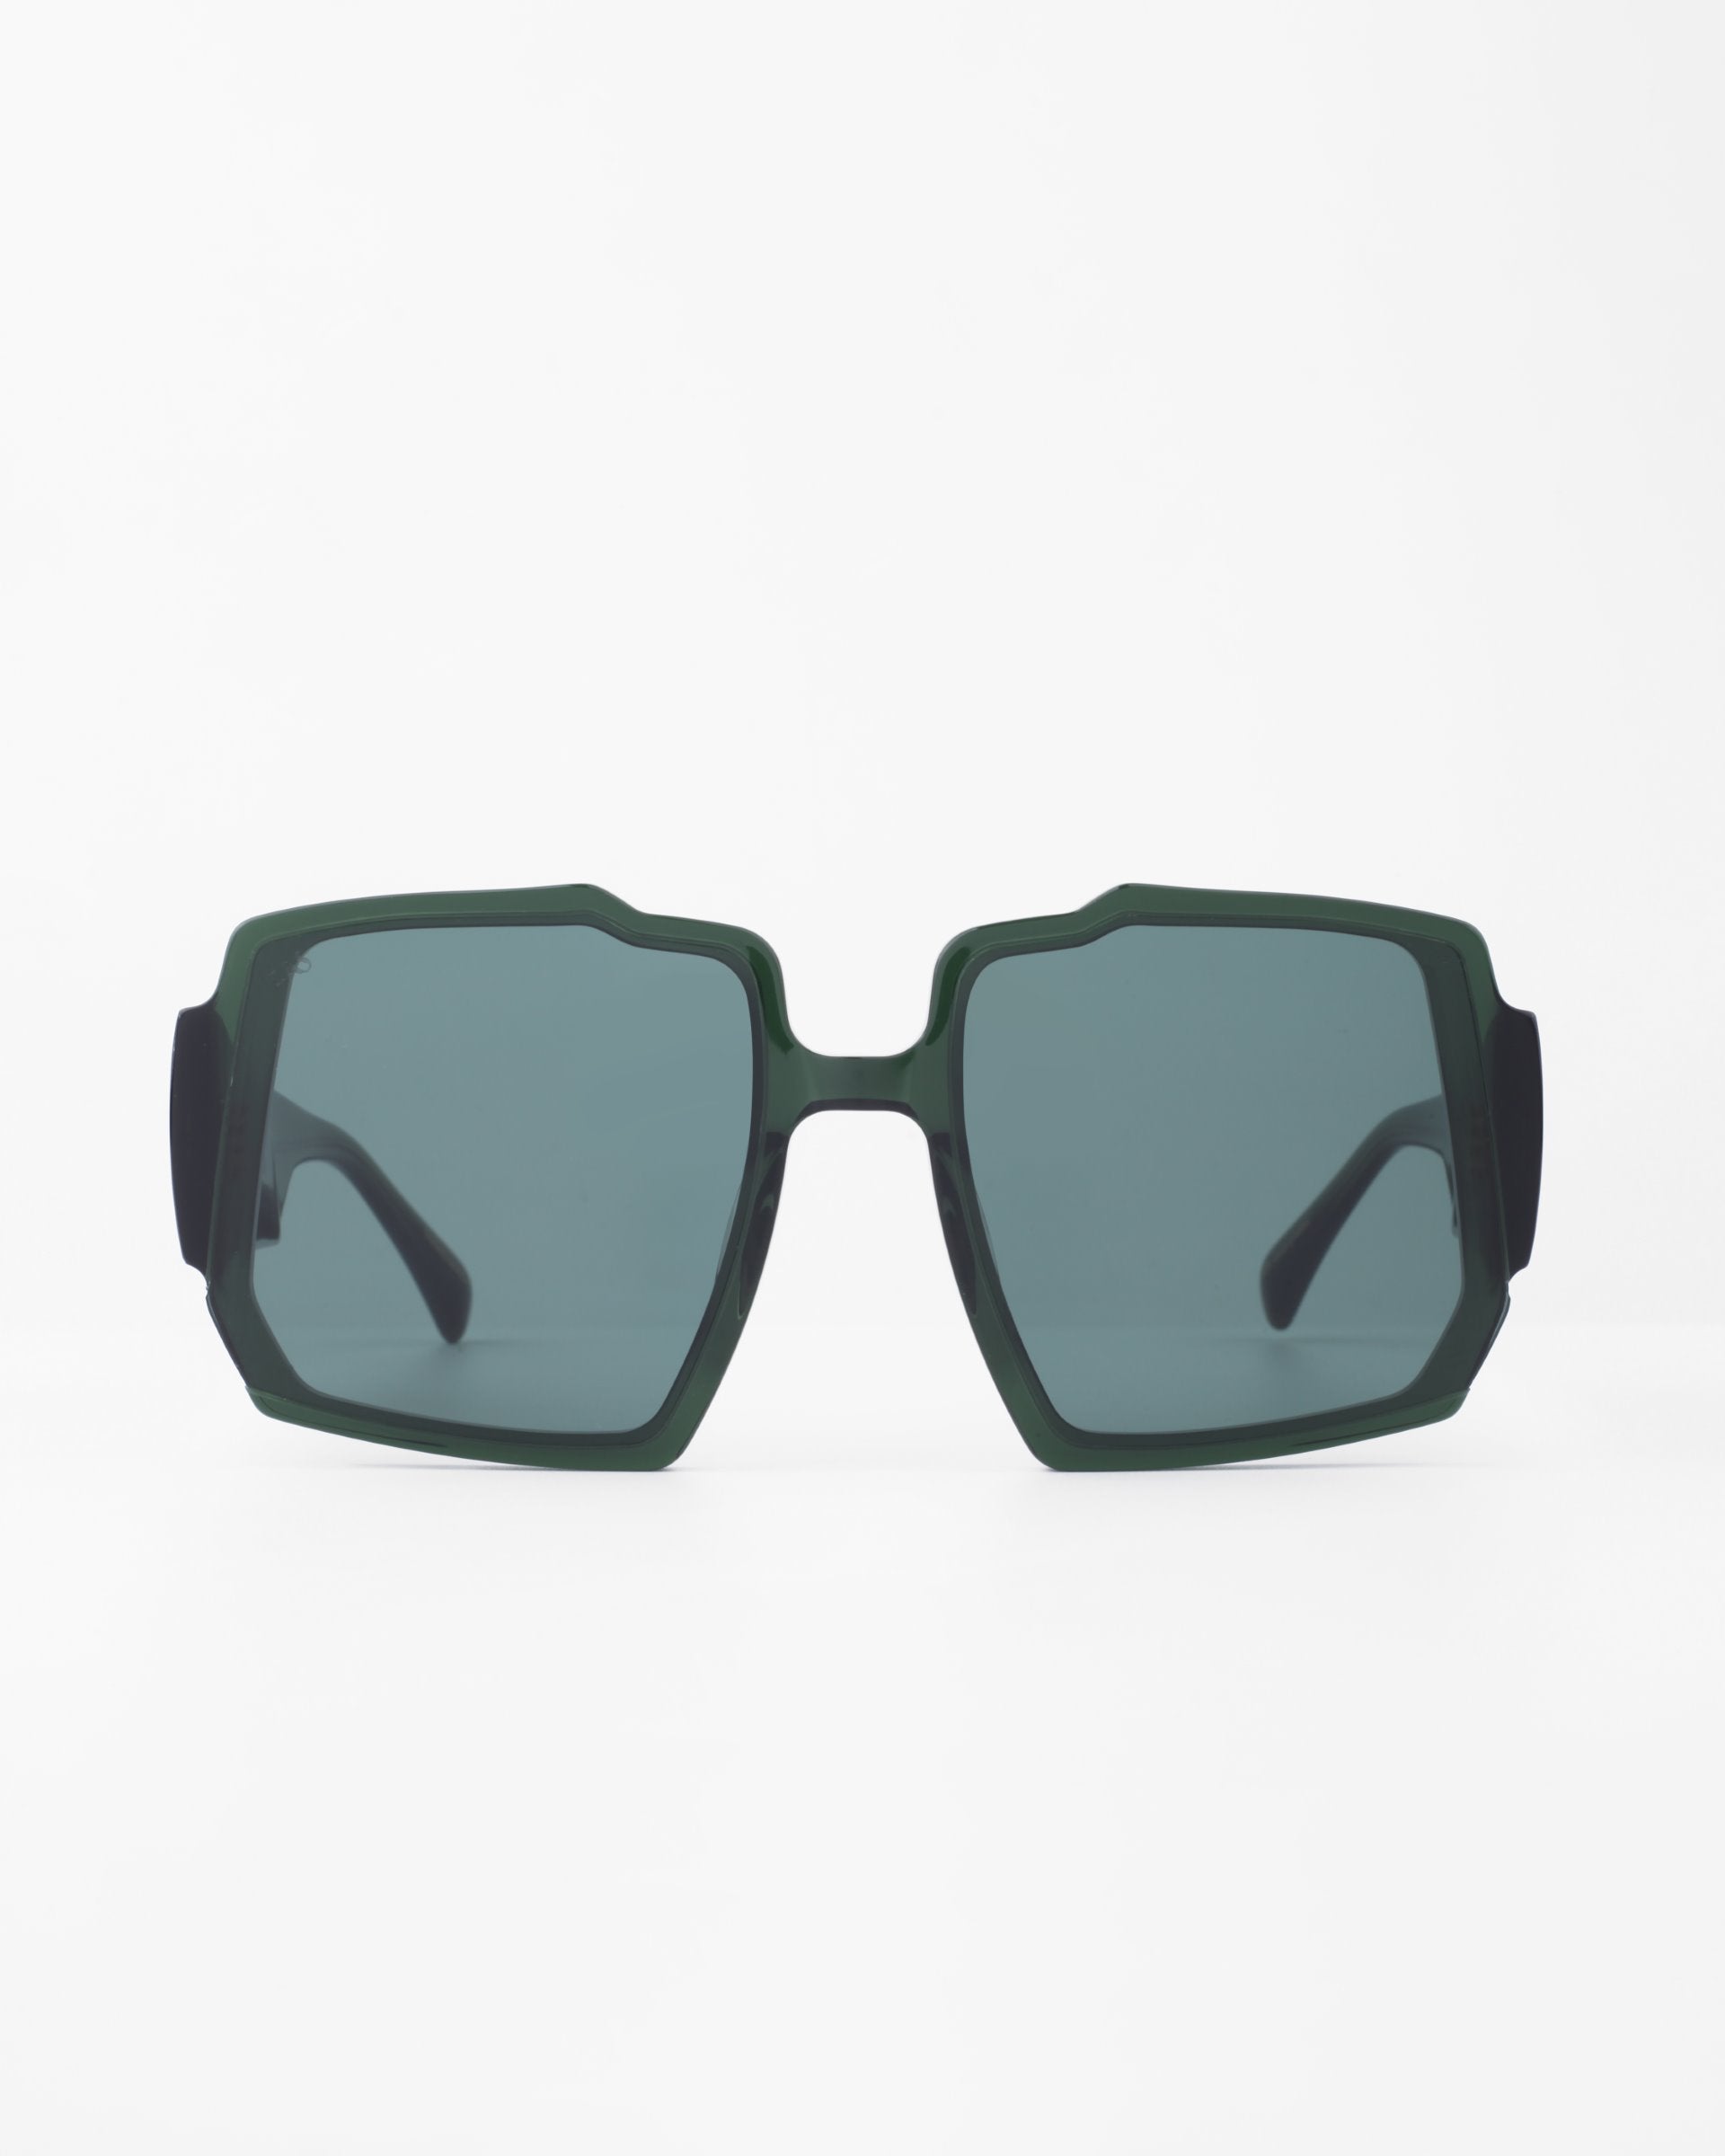 A pair of dark green rectangular sunglasses with blue-tinted, UV-protected lenses. The oversized frames, featuring a chunky acetate frame and black temples, boast a bold, angular design. The Moritz by For Art&#39;s Sake® stands out against the plain white background.